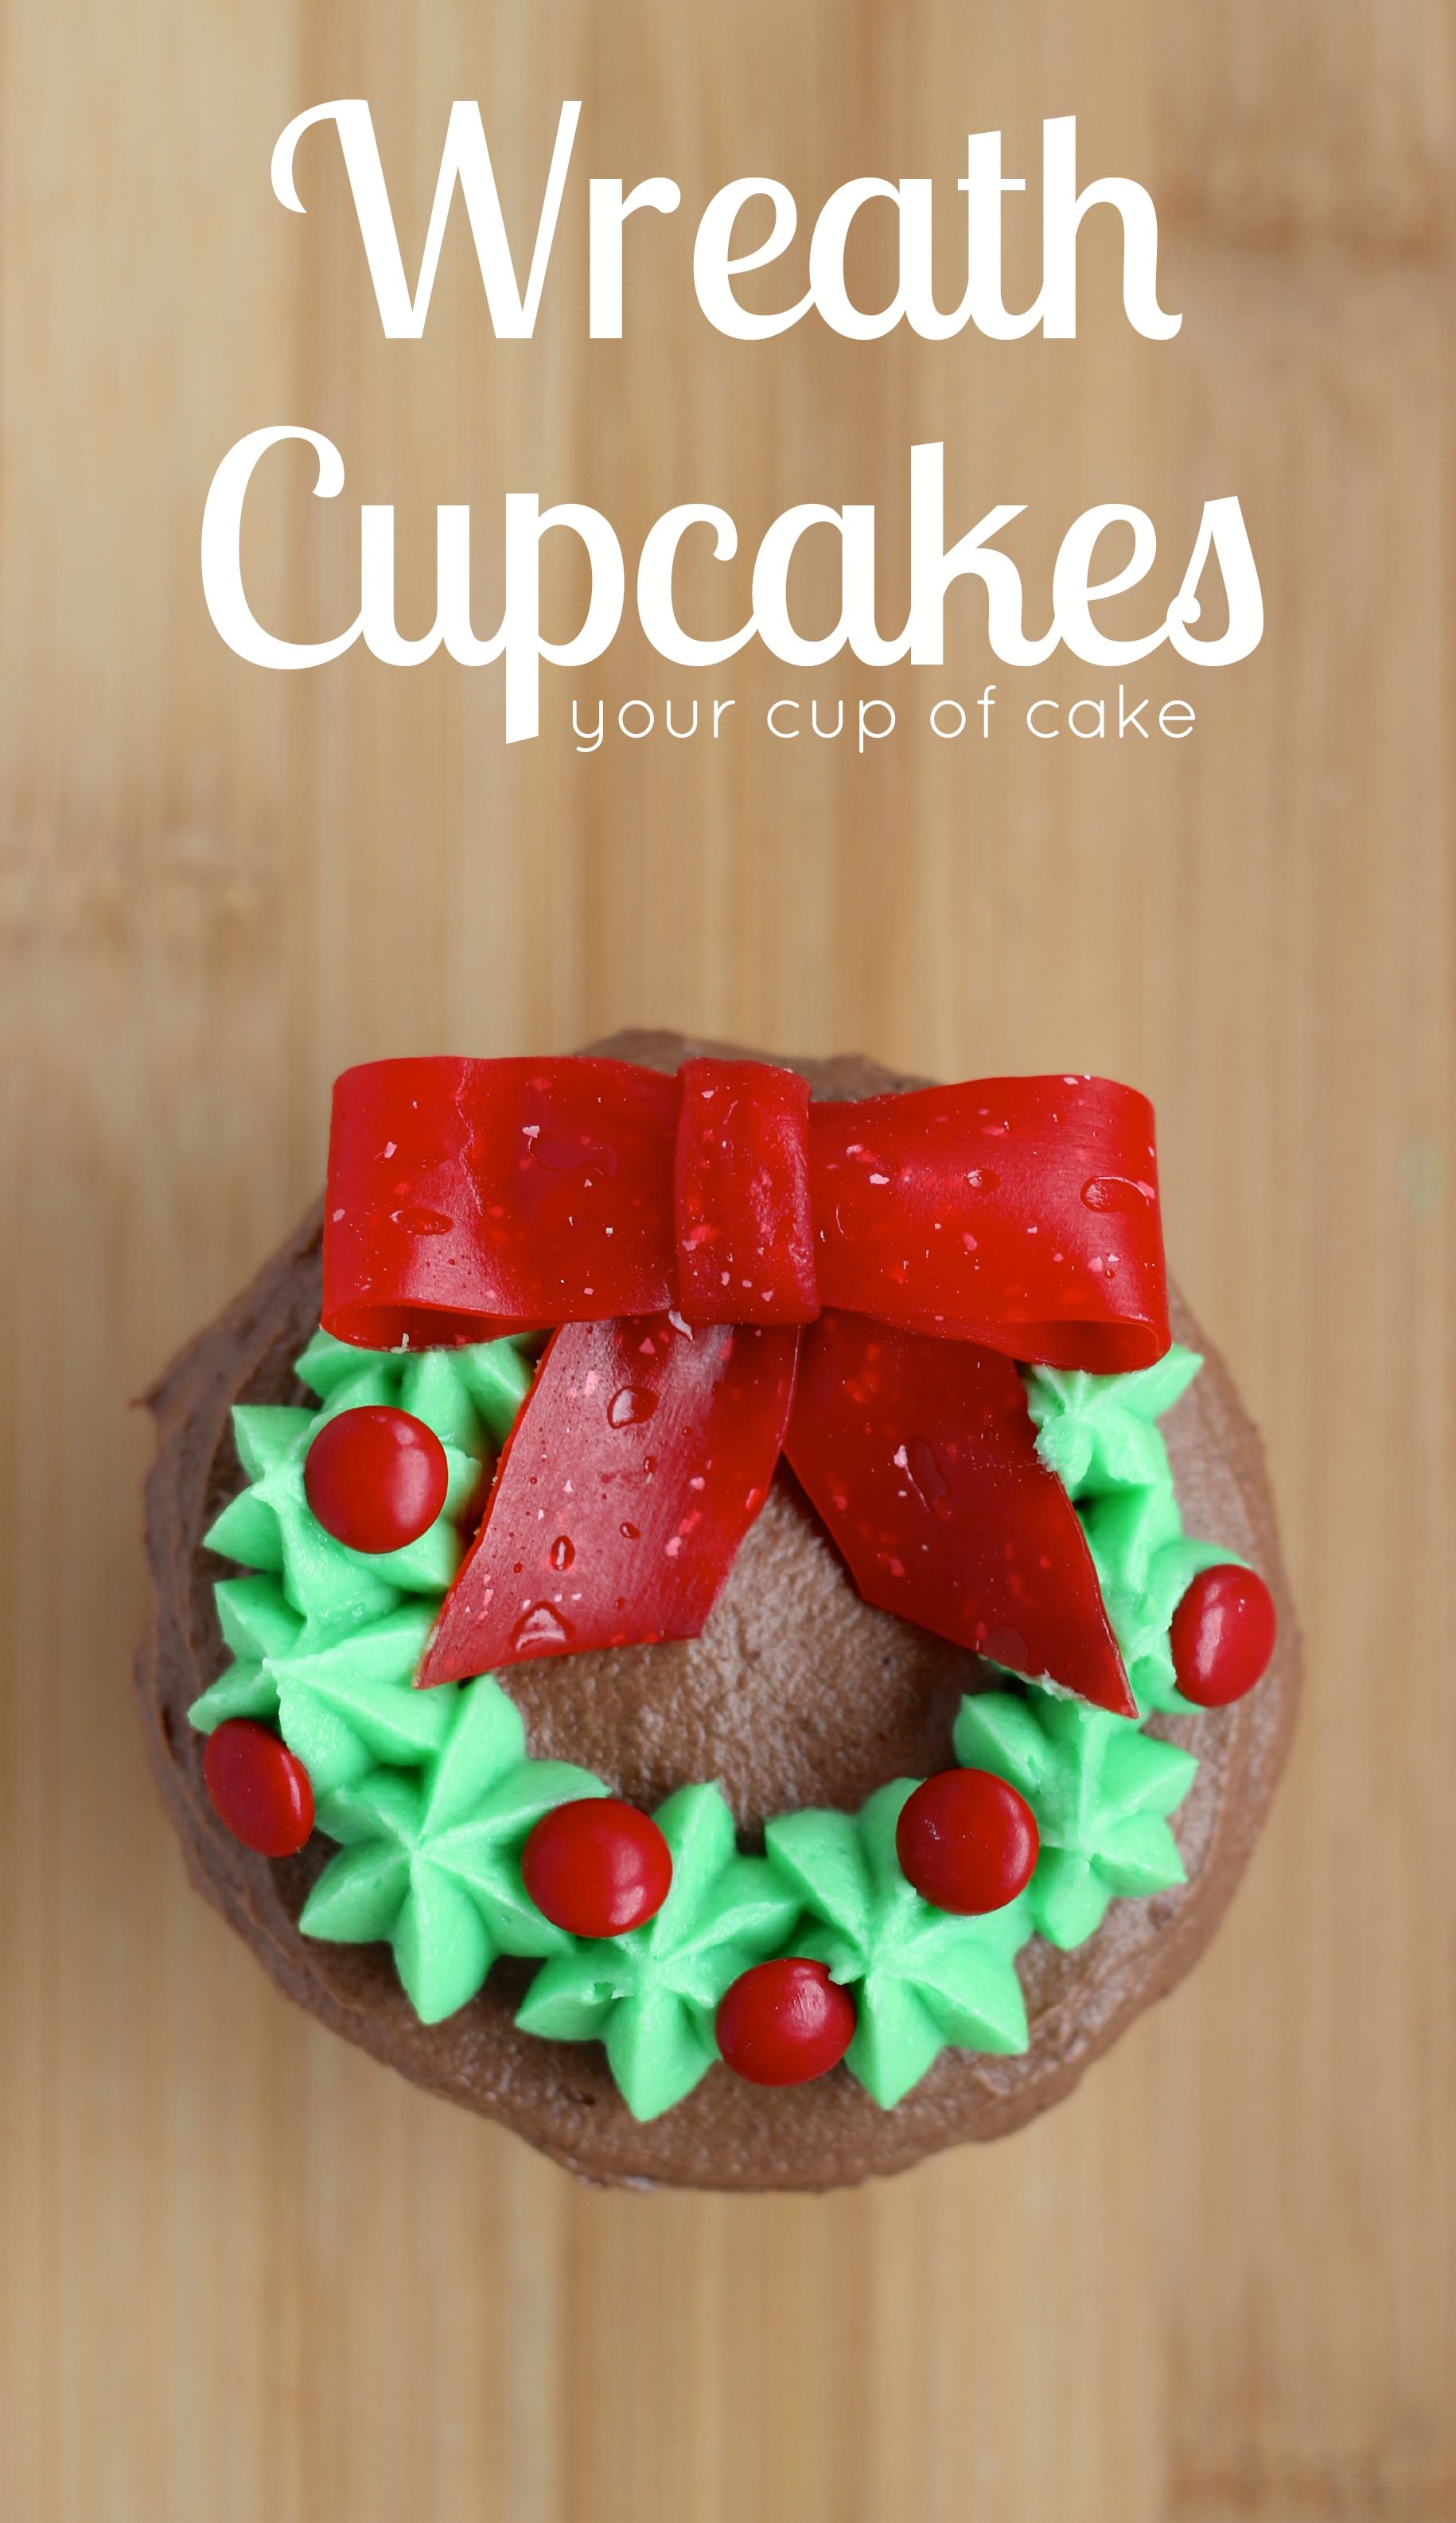 Easy Cupcake Decorating For Christmas Your Cup Of Cake